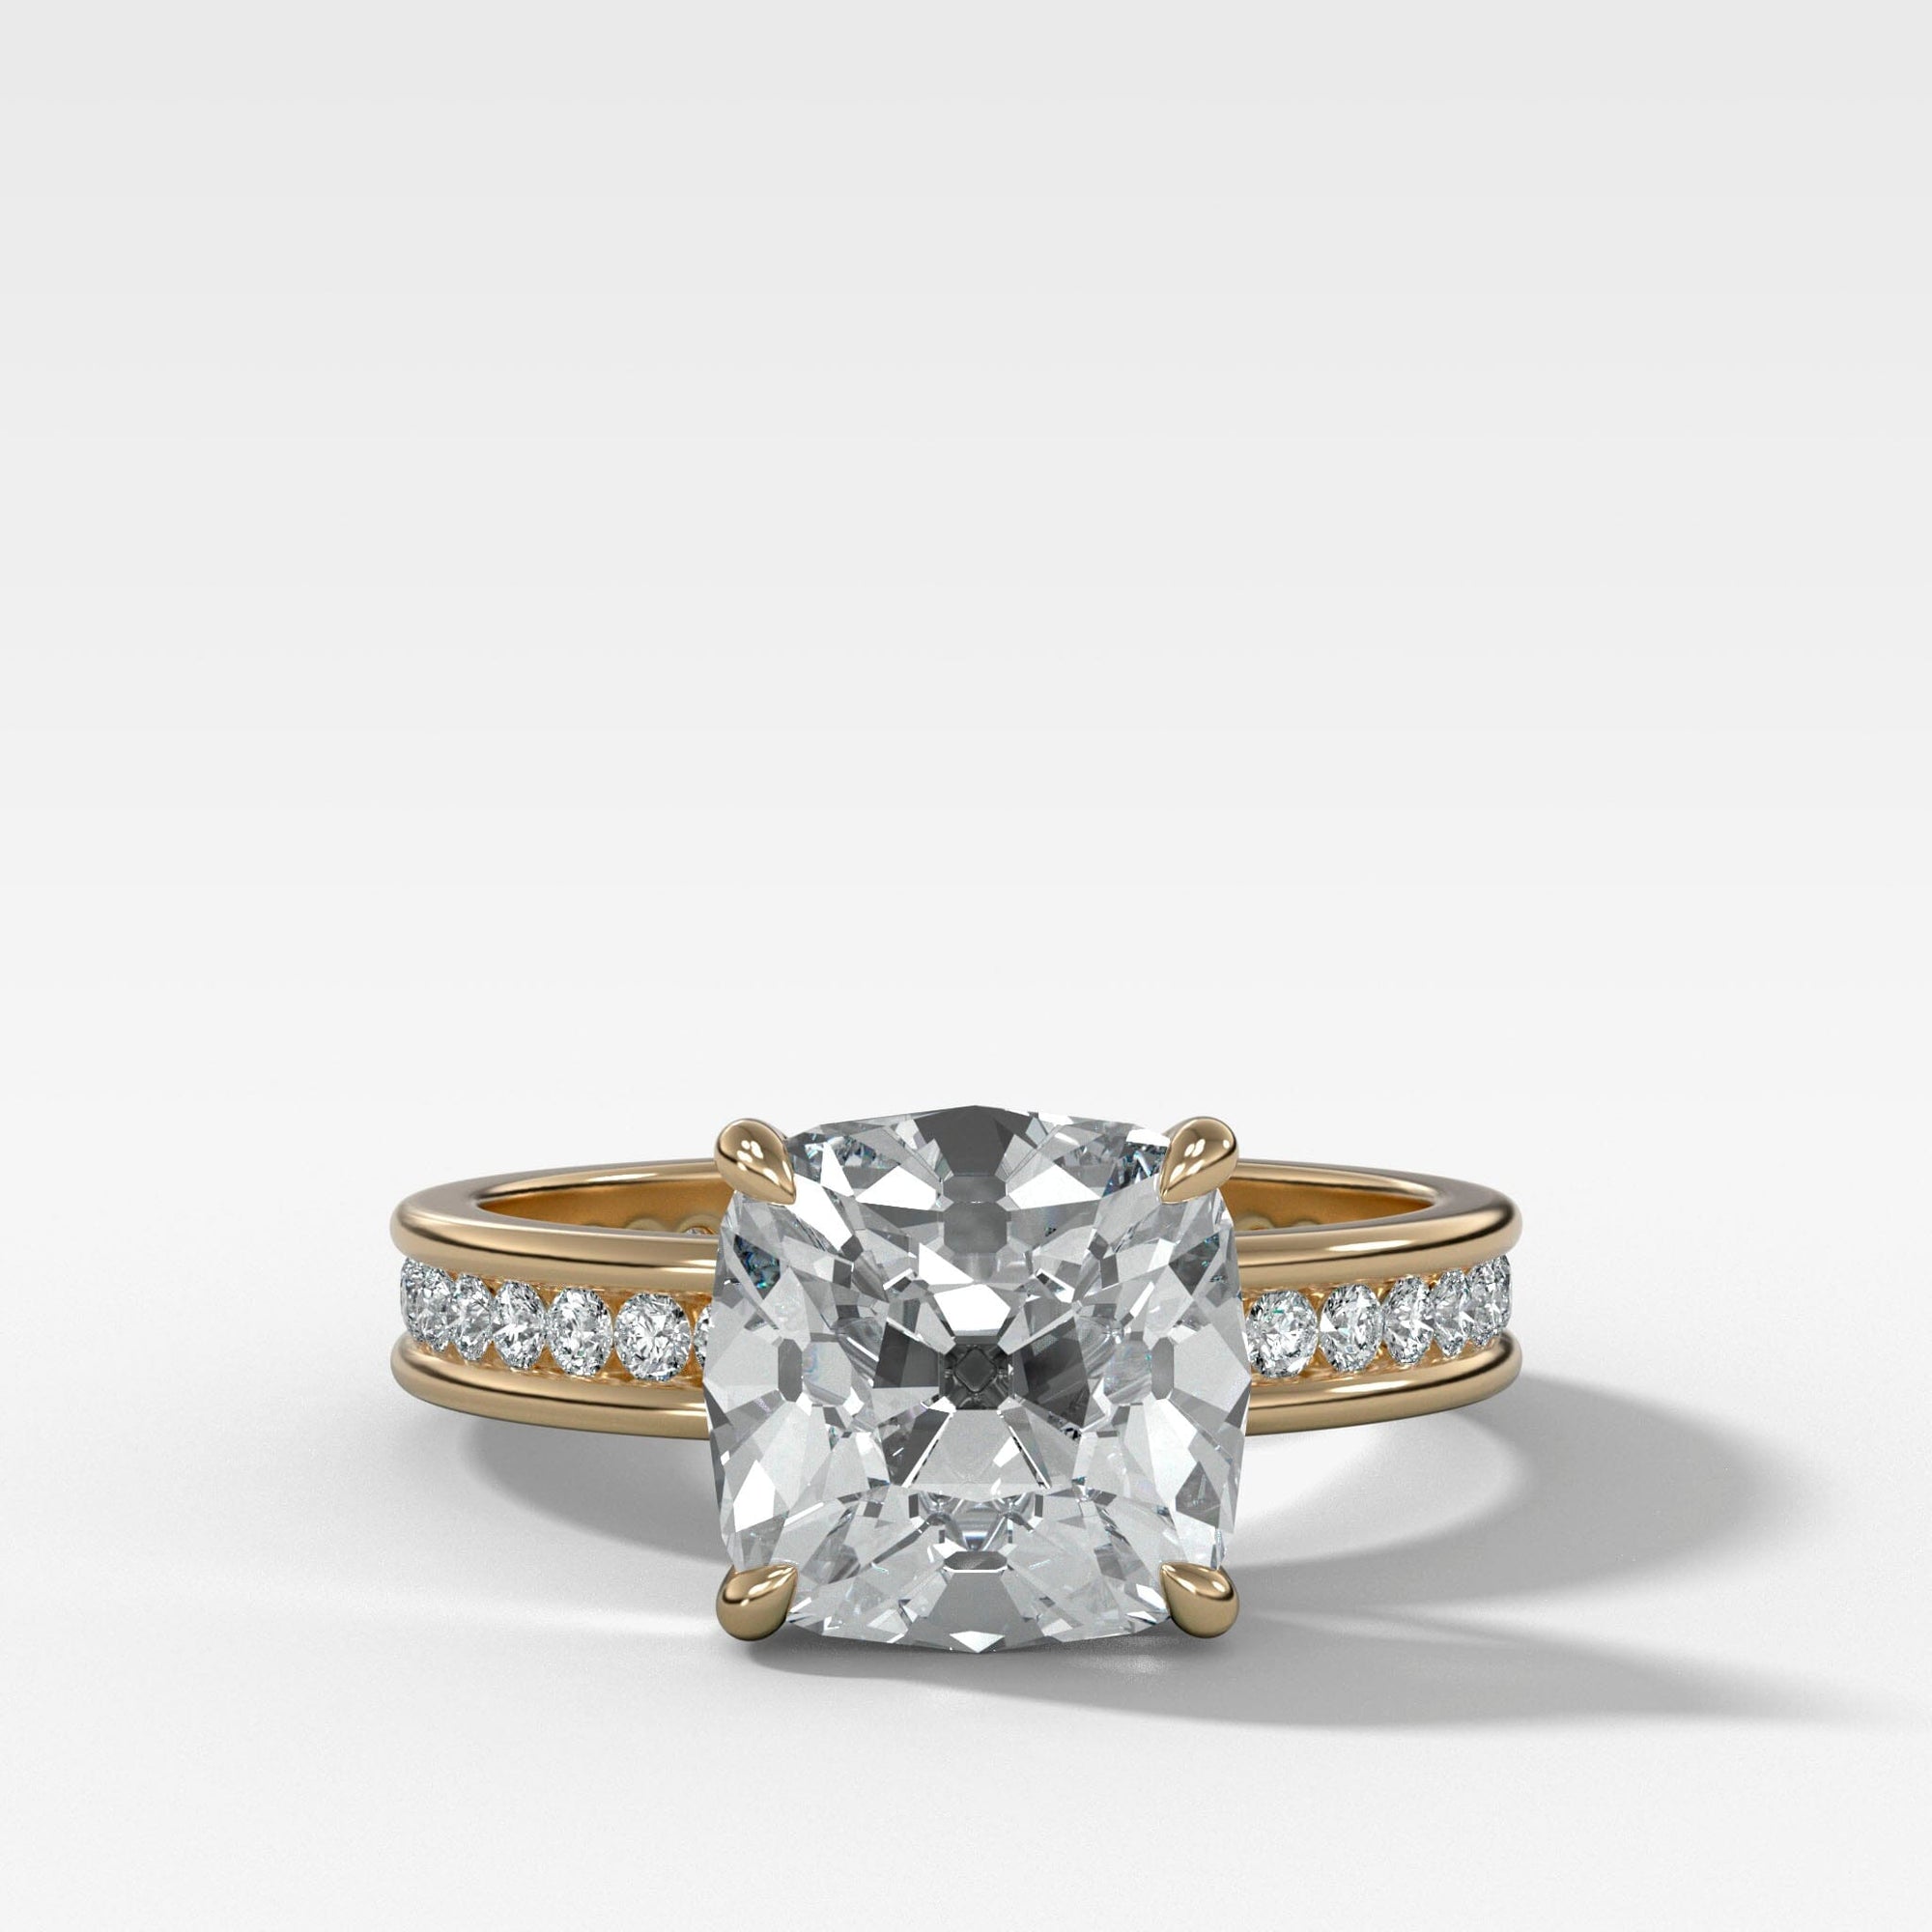 Petite Channel Set Solitaire Engagement Ring with Old Mine Cut Diamond Engagement Good Stone Inc Yellow Gold 14k Natural